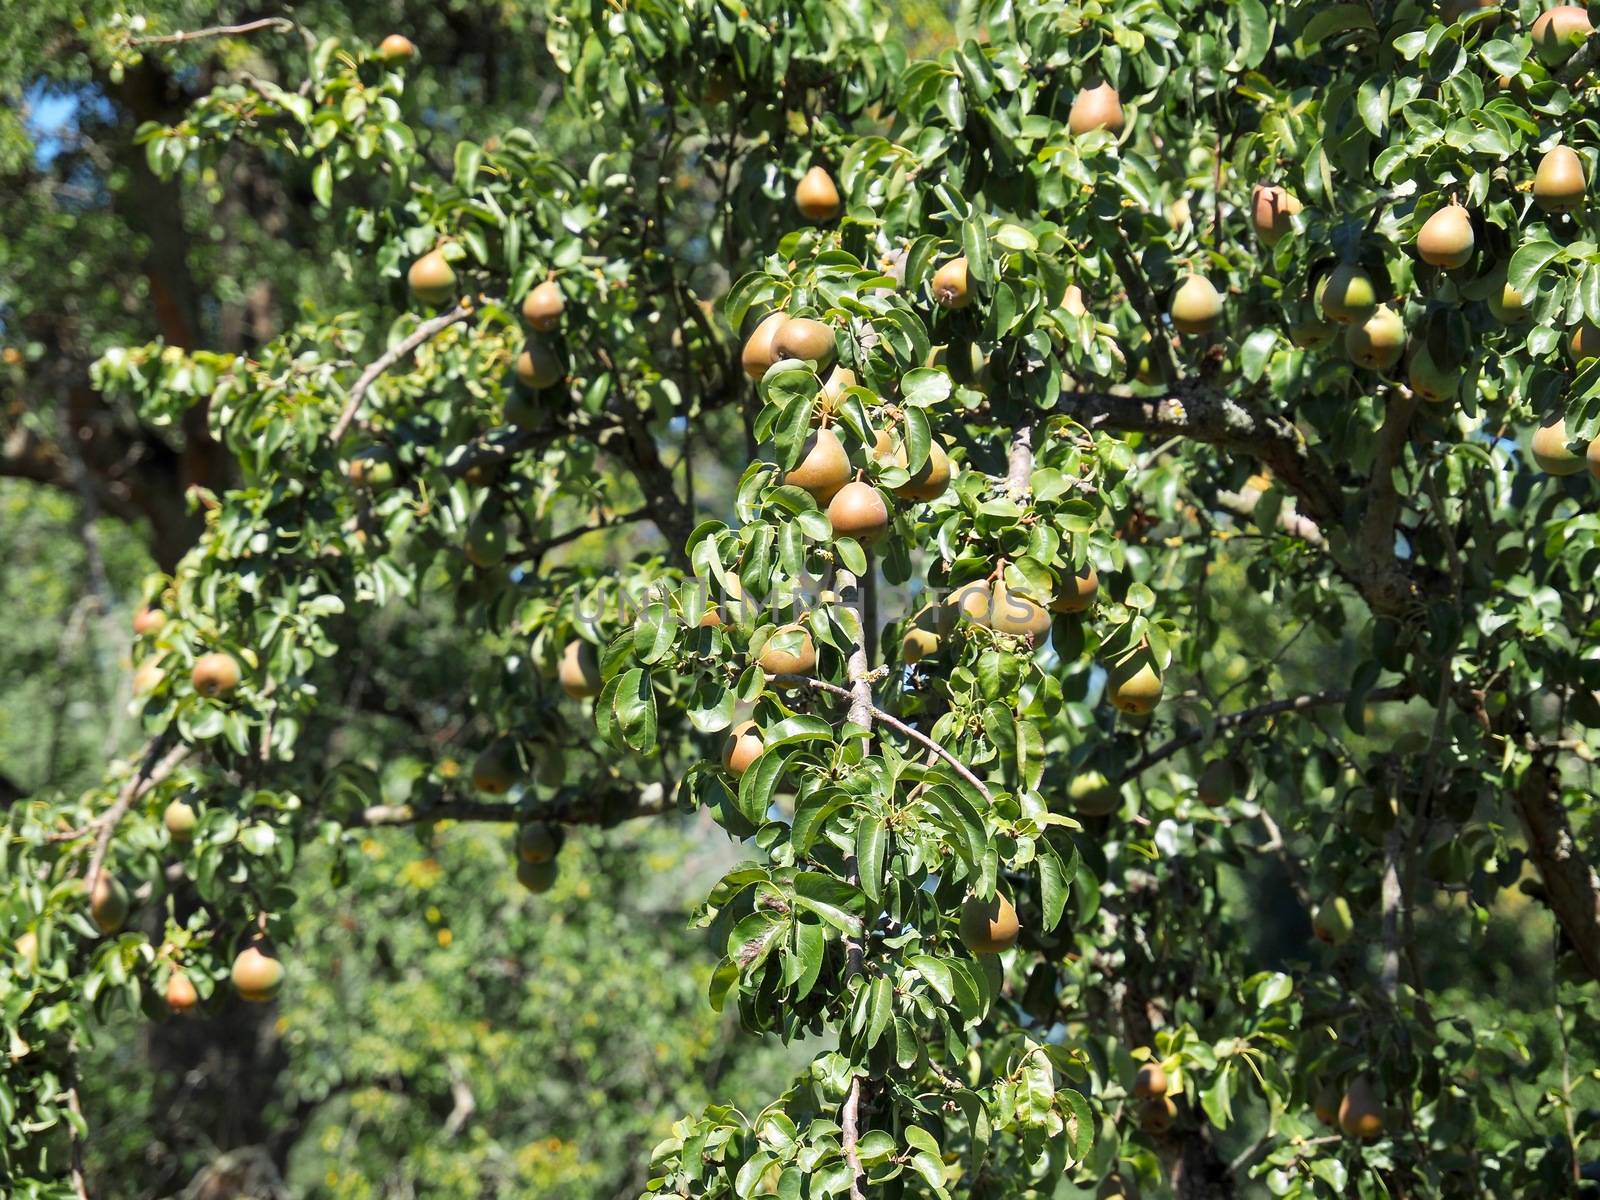 Many pears hang on a tree in summer